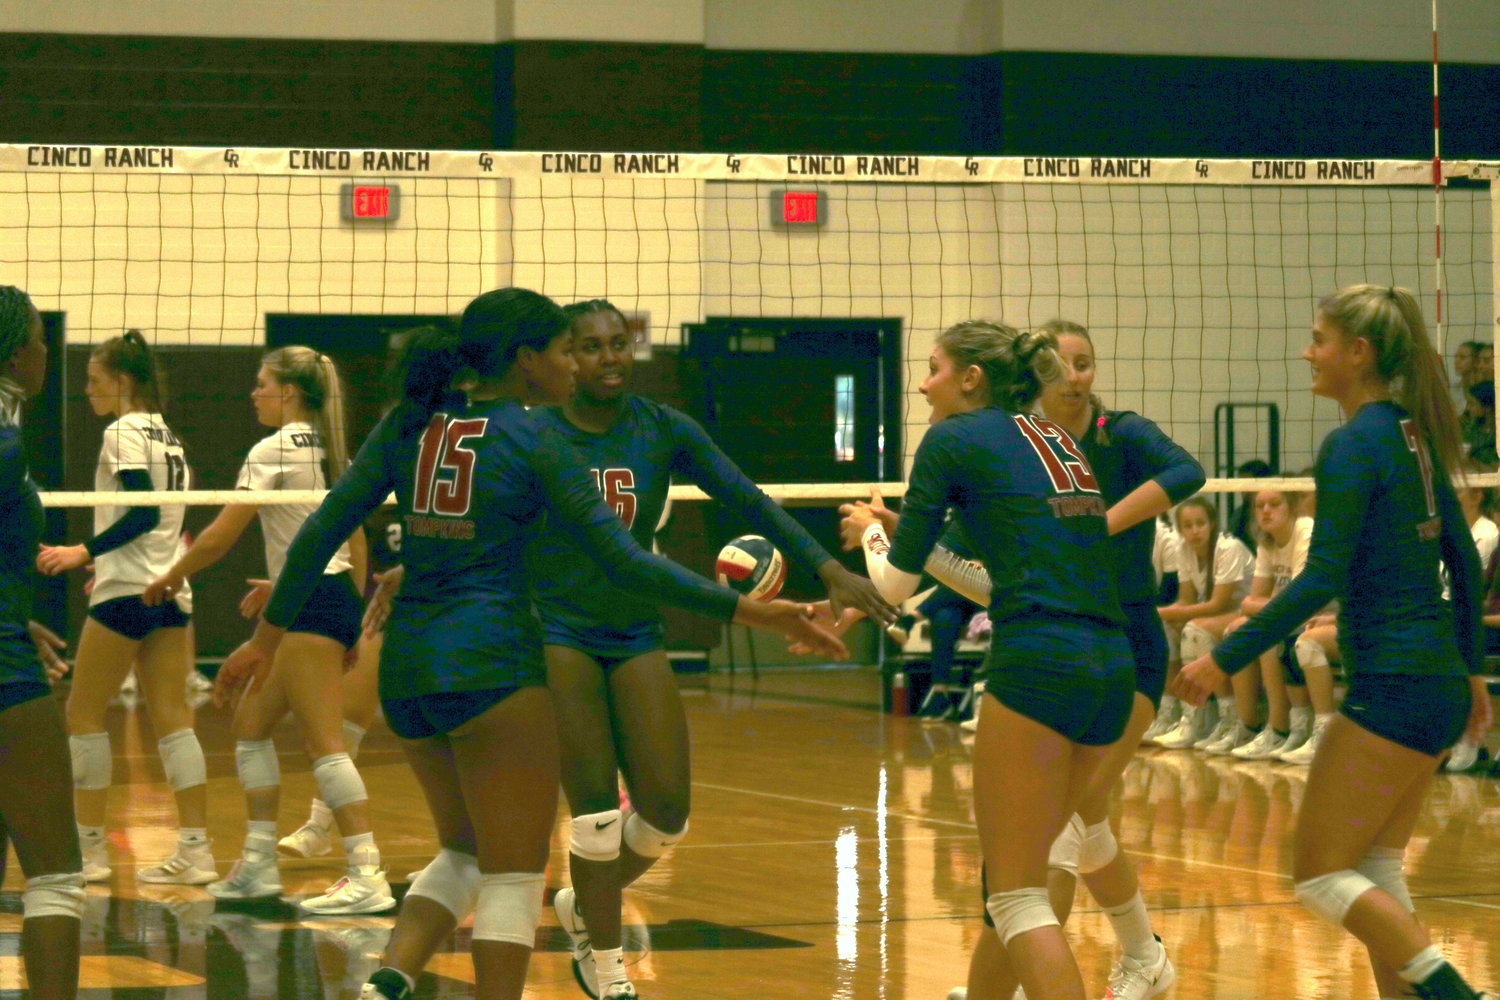 Tompkins celebrates winning a point during a match against Cinco Ranch at the Cinco Ranch gym on Tuesday.